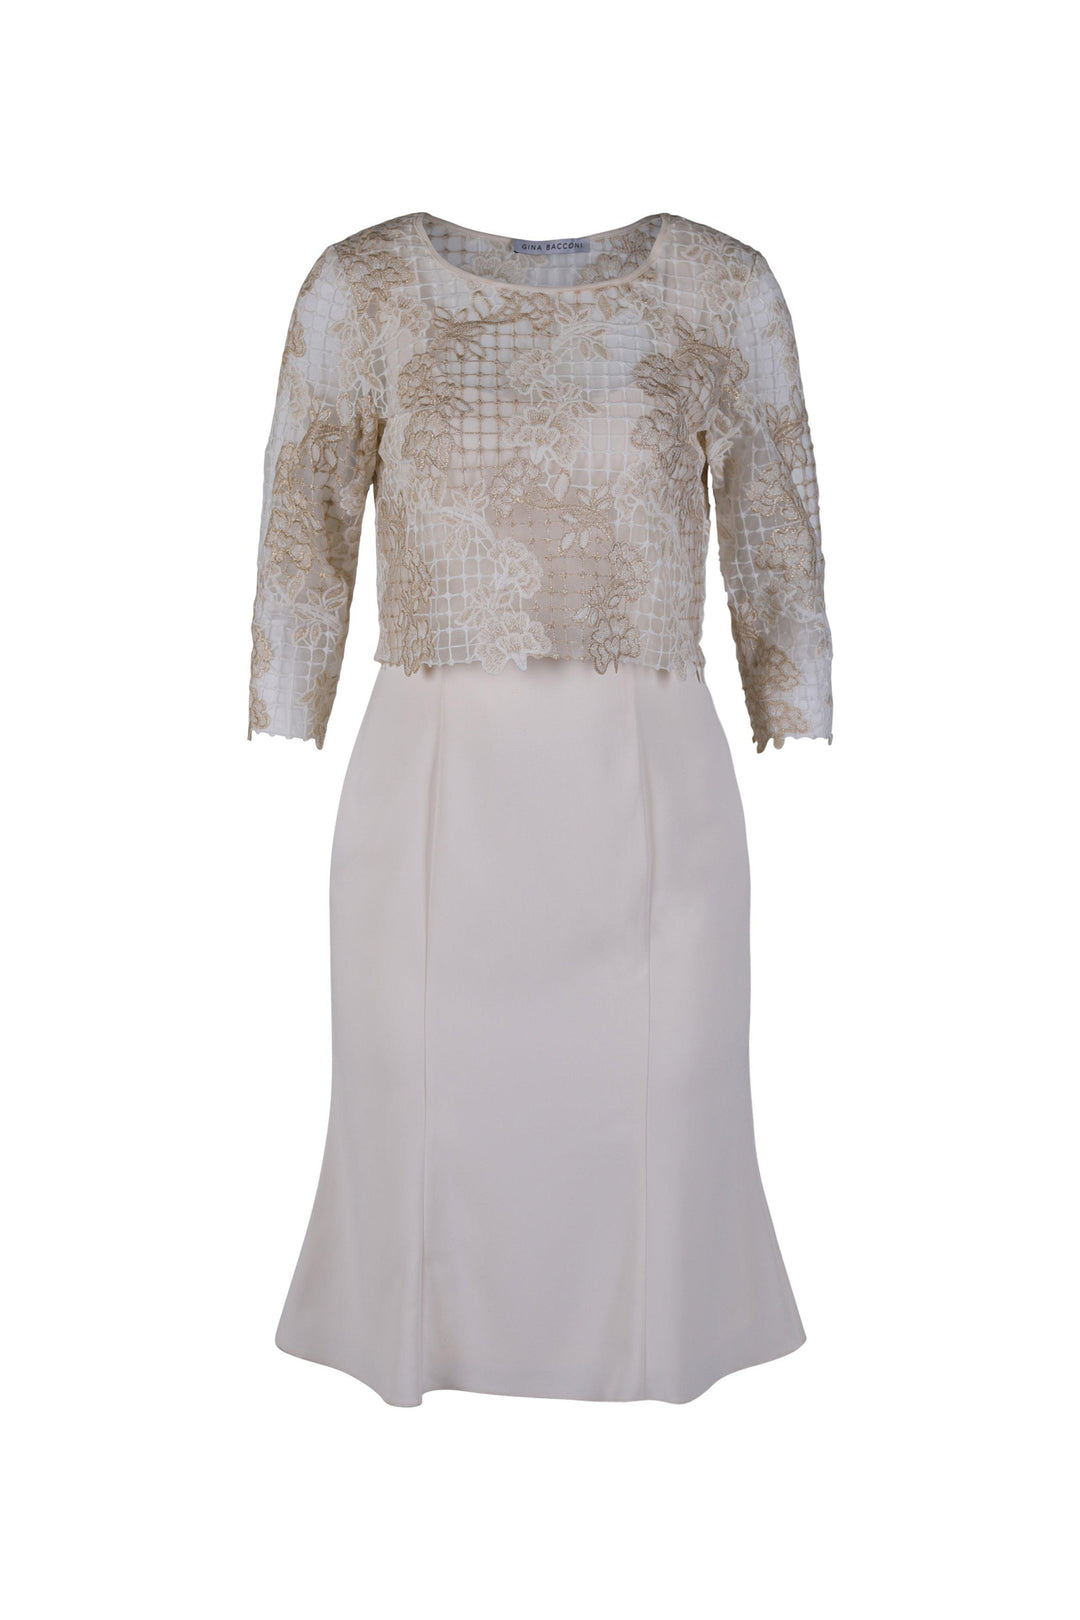 Gina Bacconi 1007 - Champagne/cream dress with floral overtop-Dress